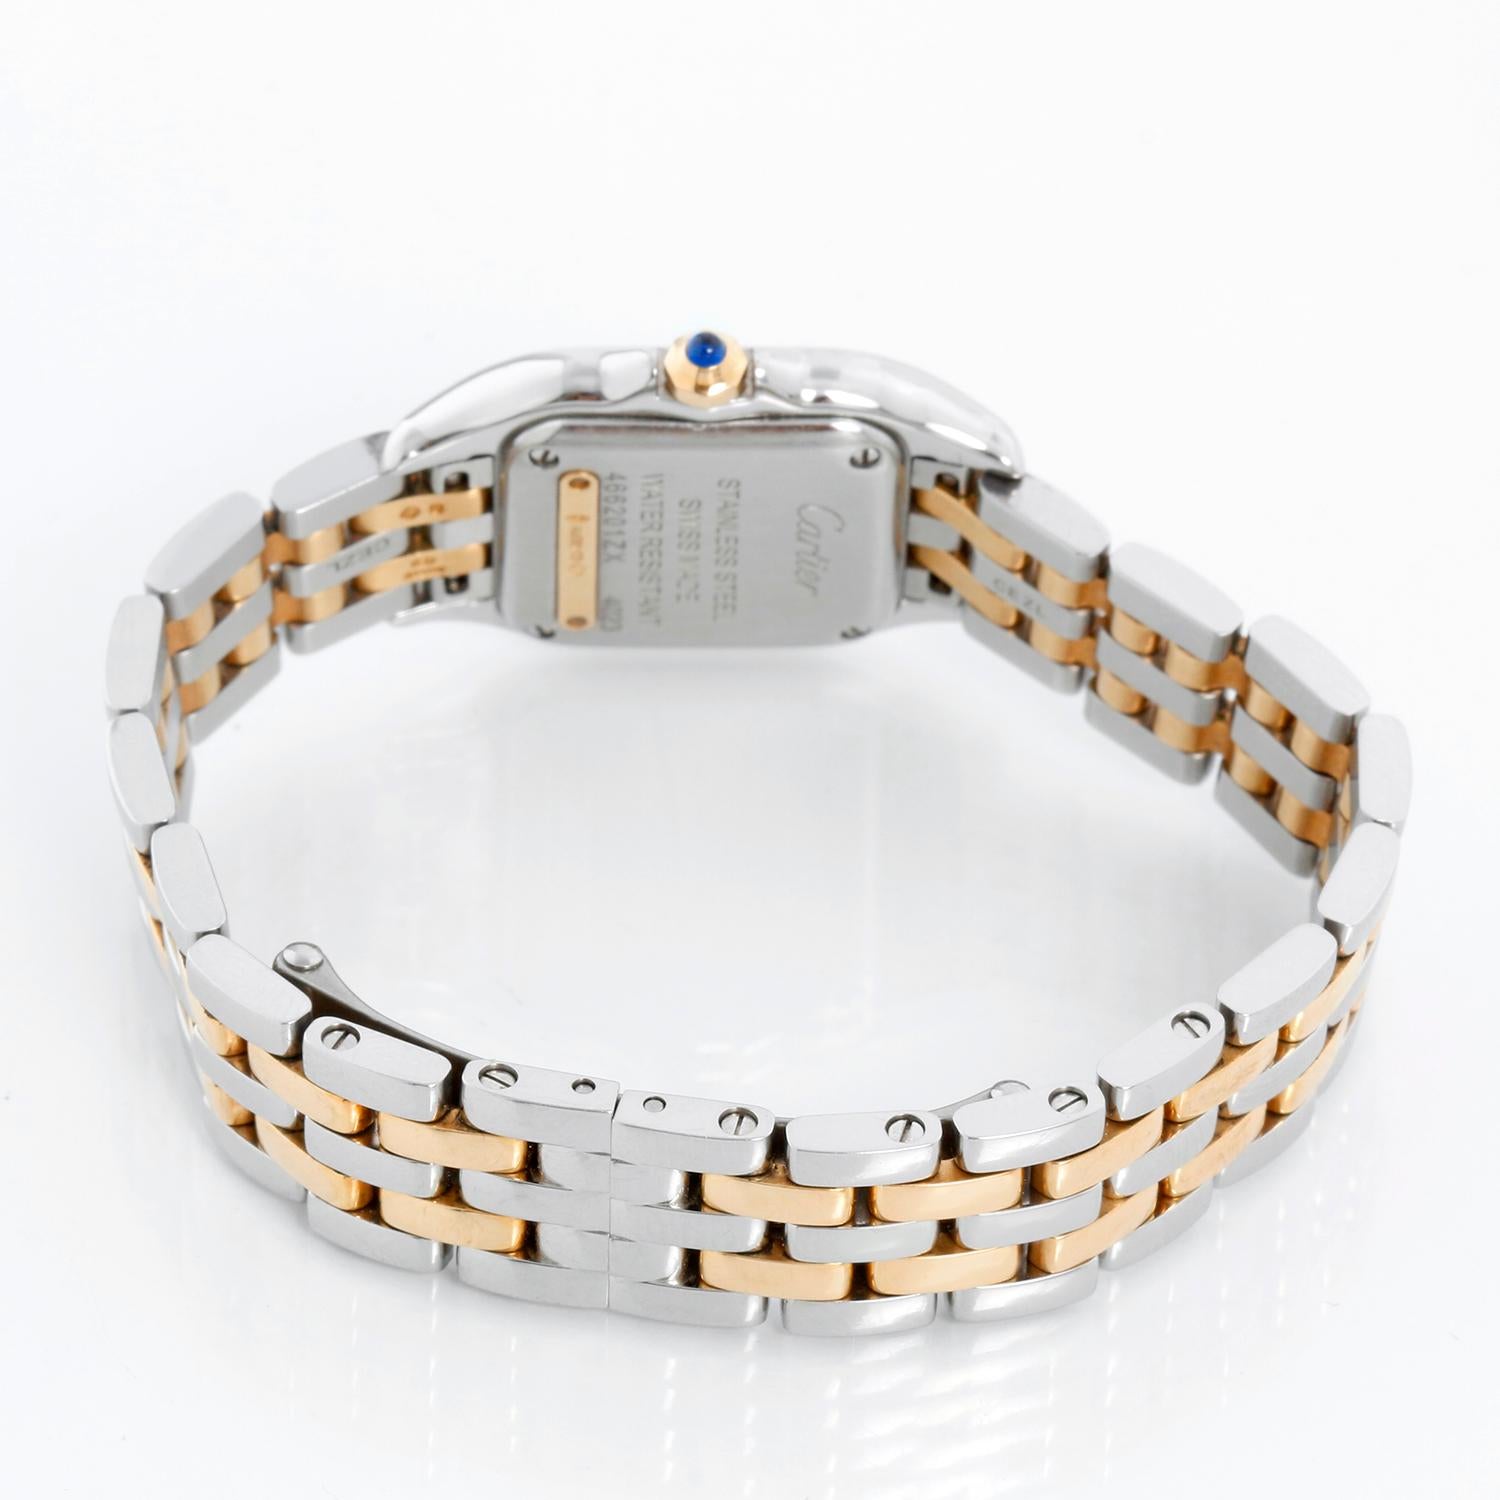 Women's Cartier Panther Small 2-Tone Steel & Gold Panthere Watch 4023 W2PN0006